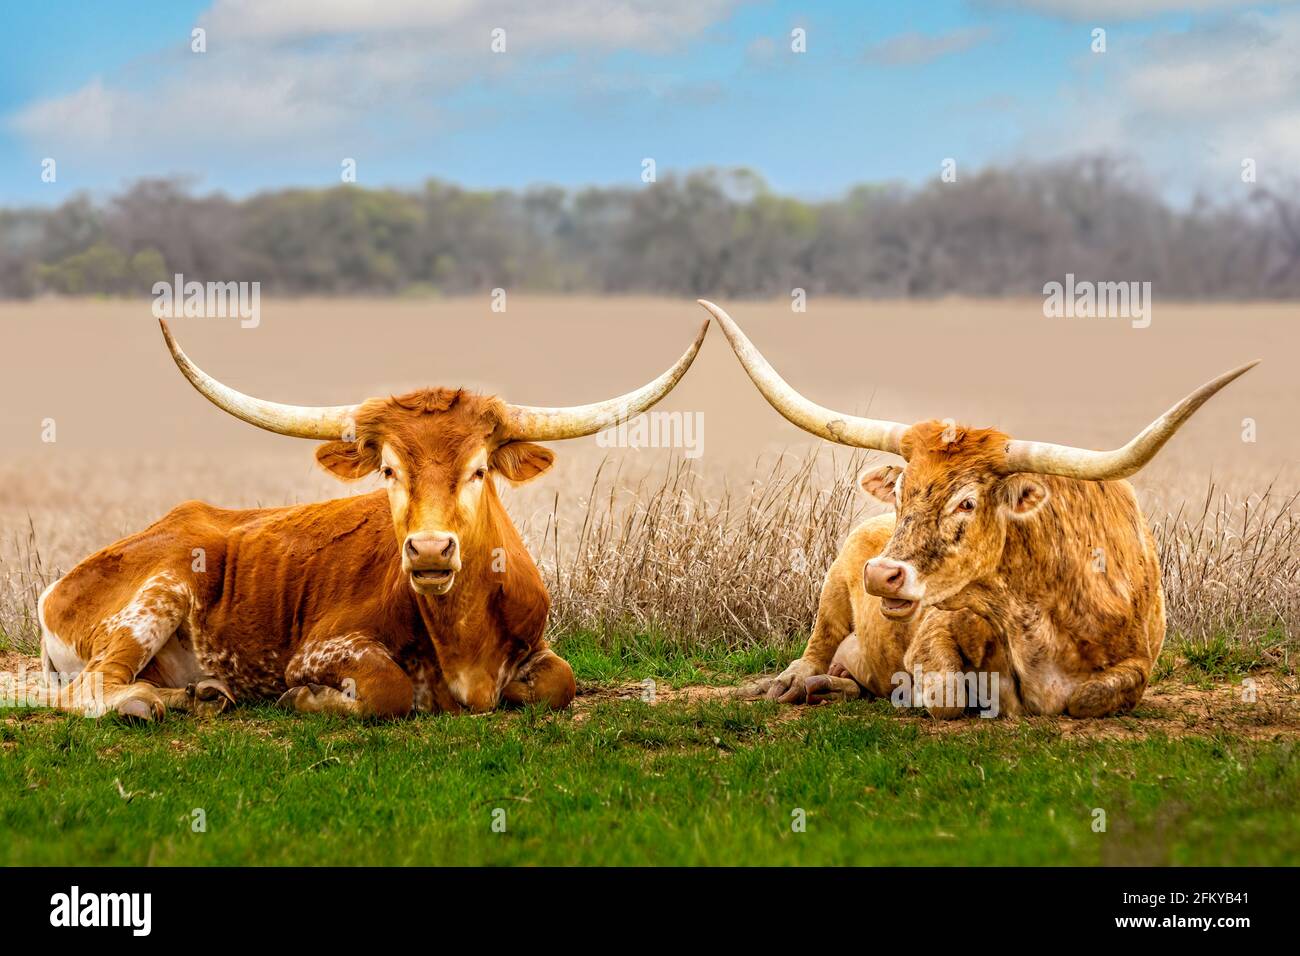 A couple of Texas longhorn cattle relaxing in the grass Stock Photo